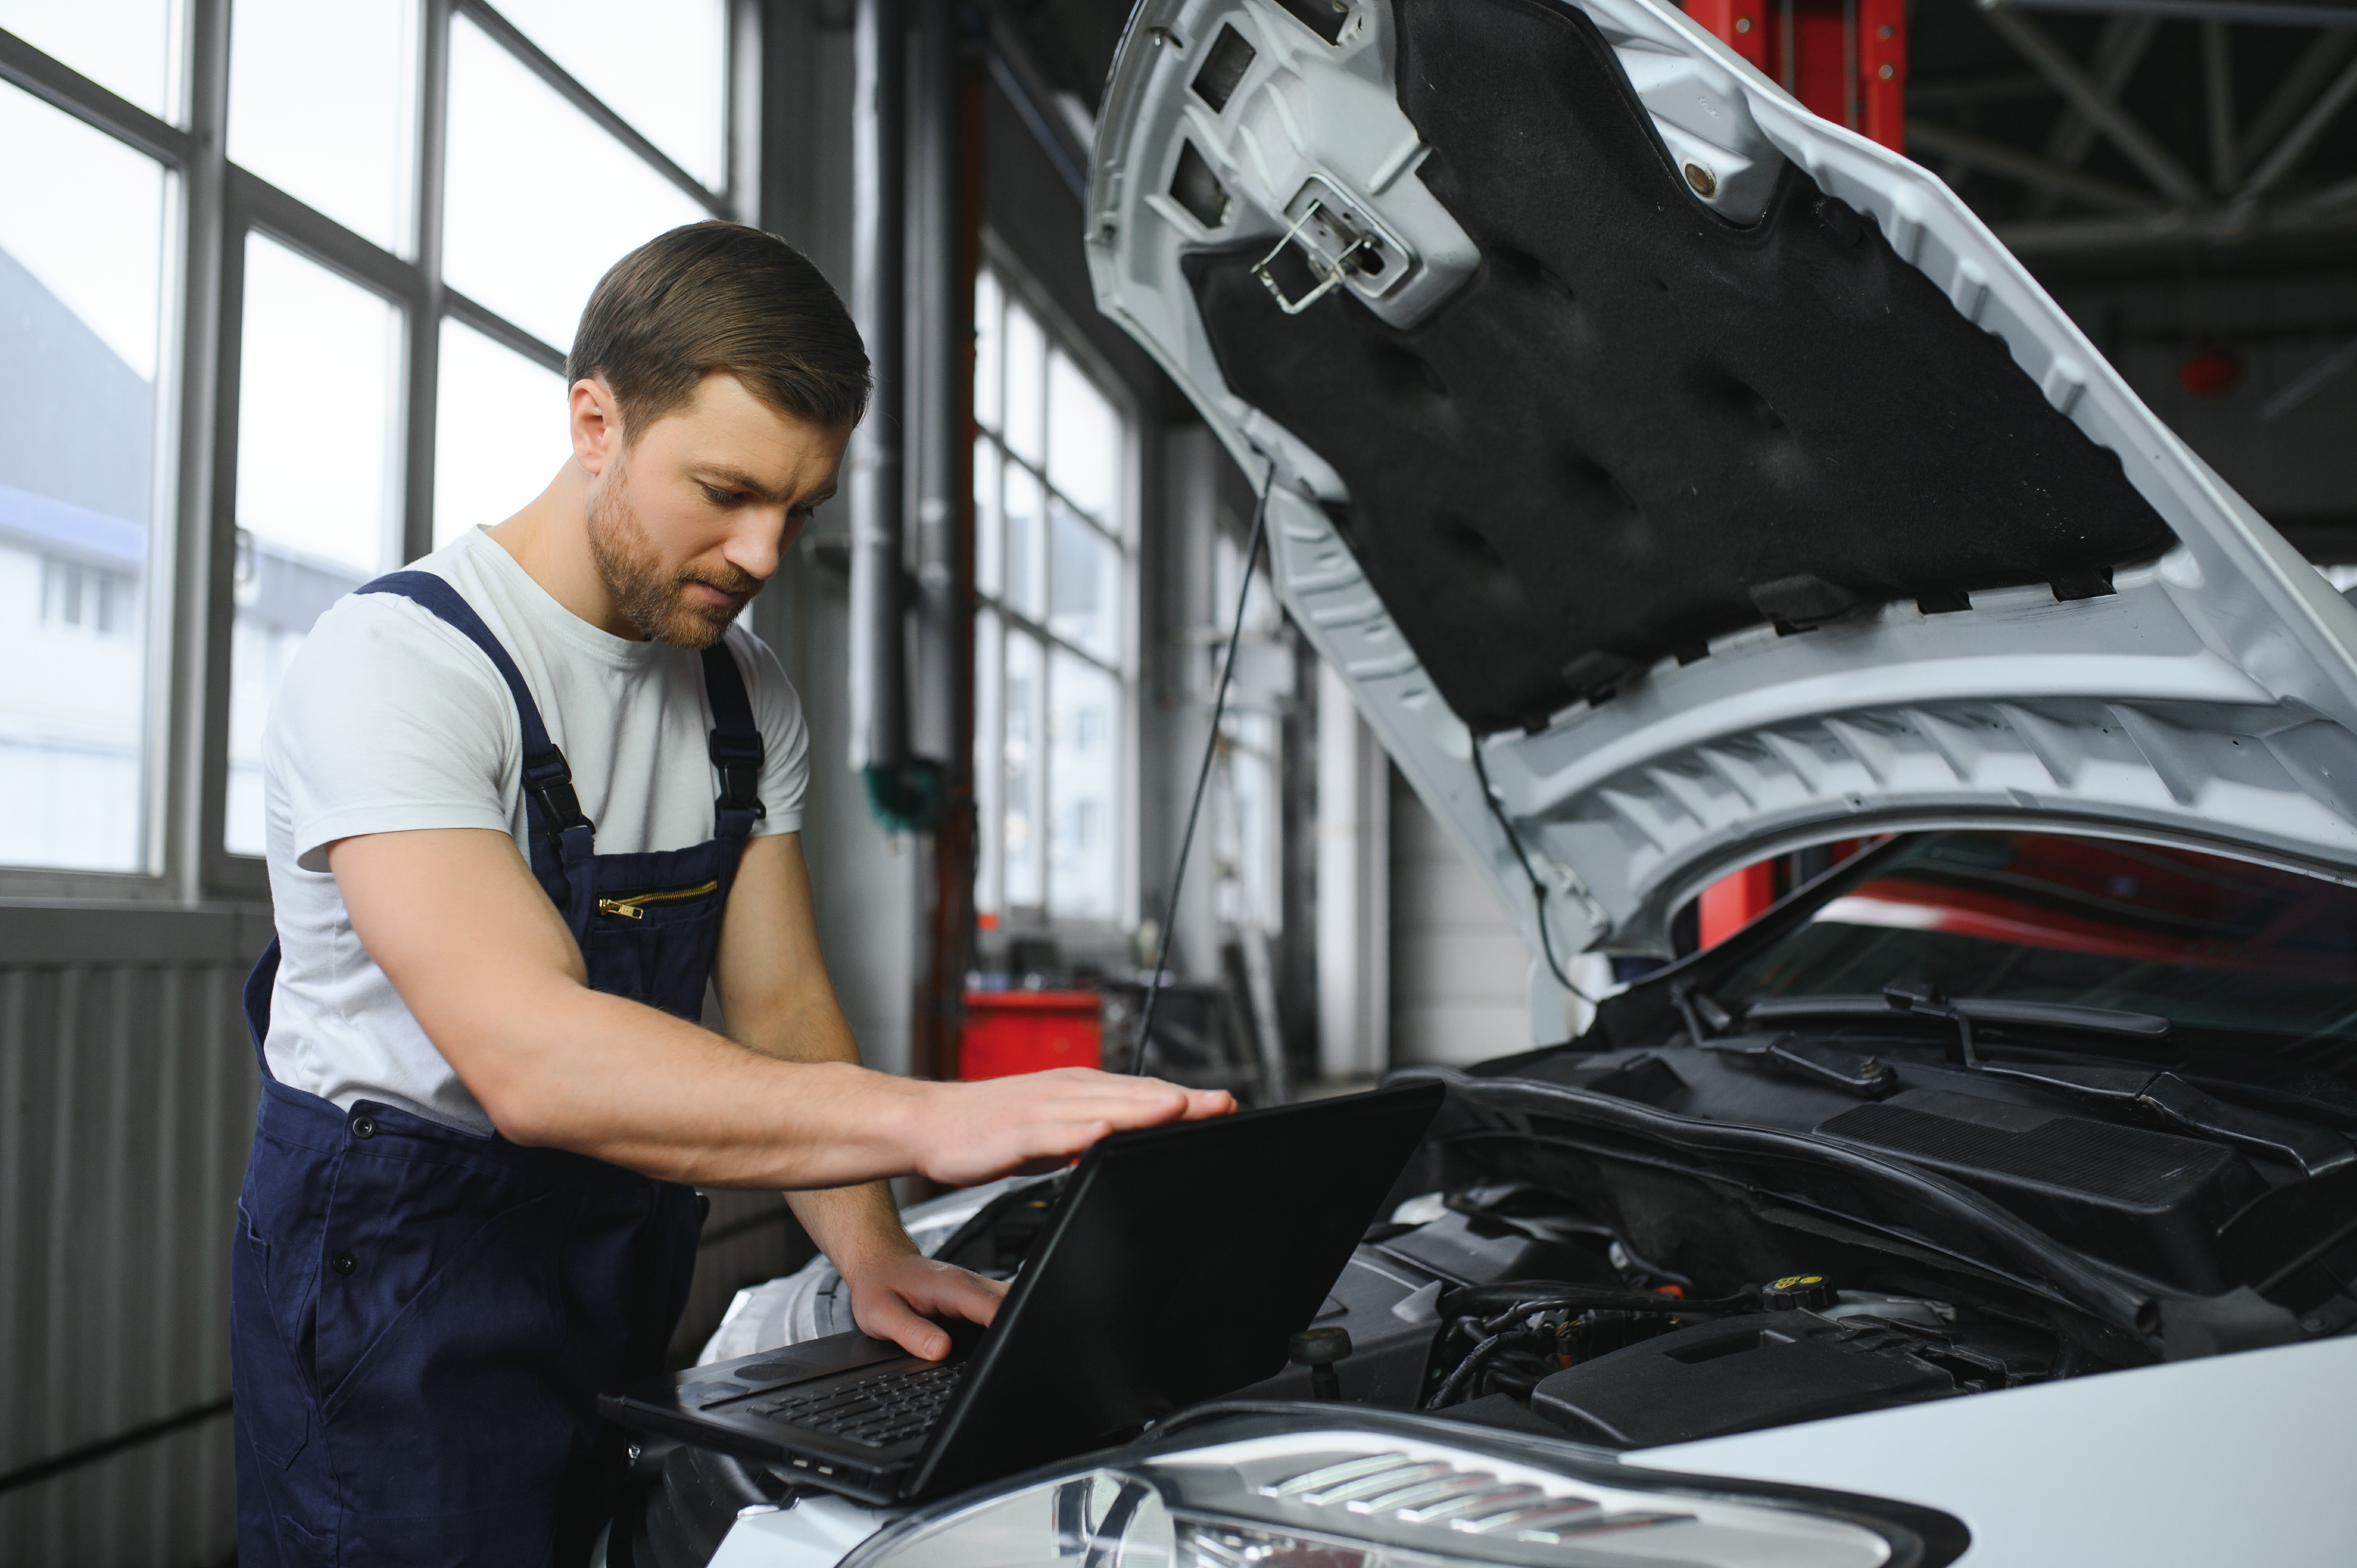 Mechanic man mechanic manager worker using a laptop computer checking car in workshop at auto car repair service center. Engineer young man looking at inspection vehicle details under car hood | Source: Shutterstock